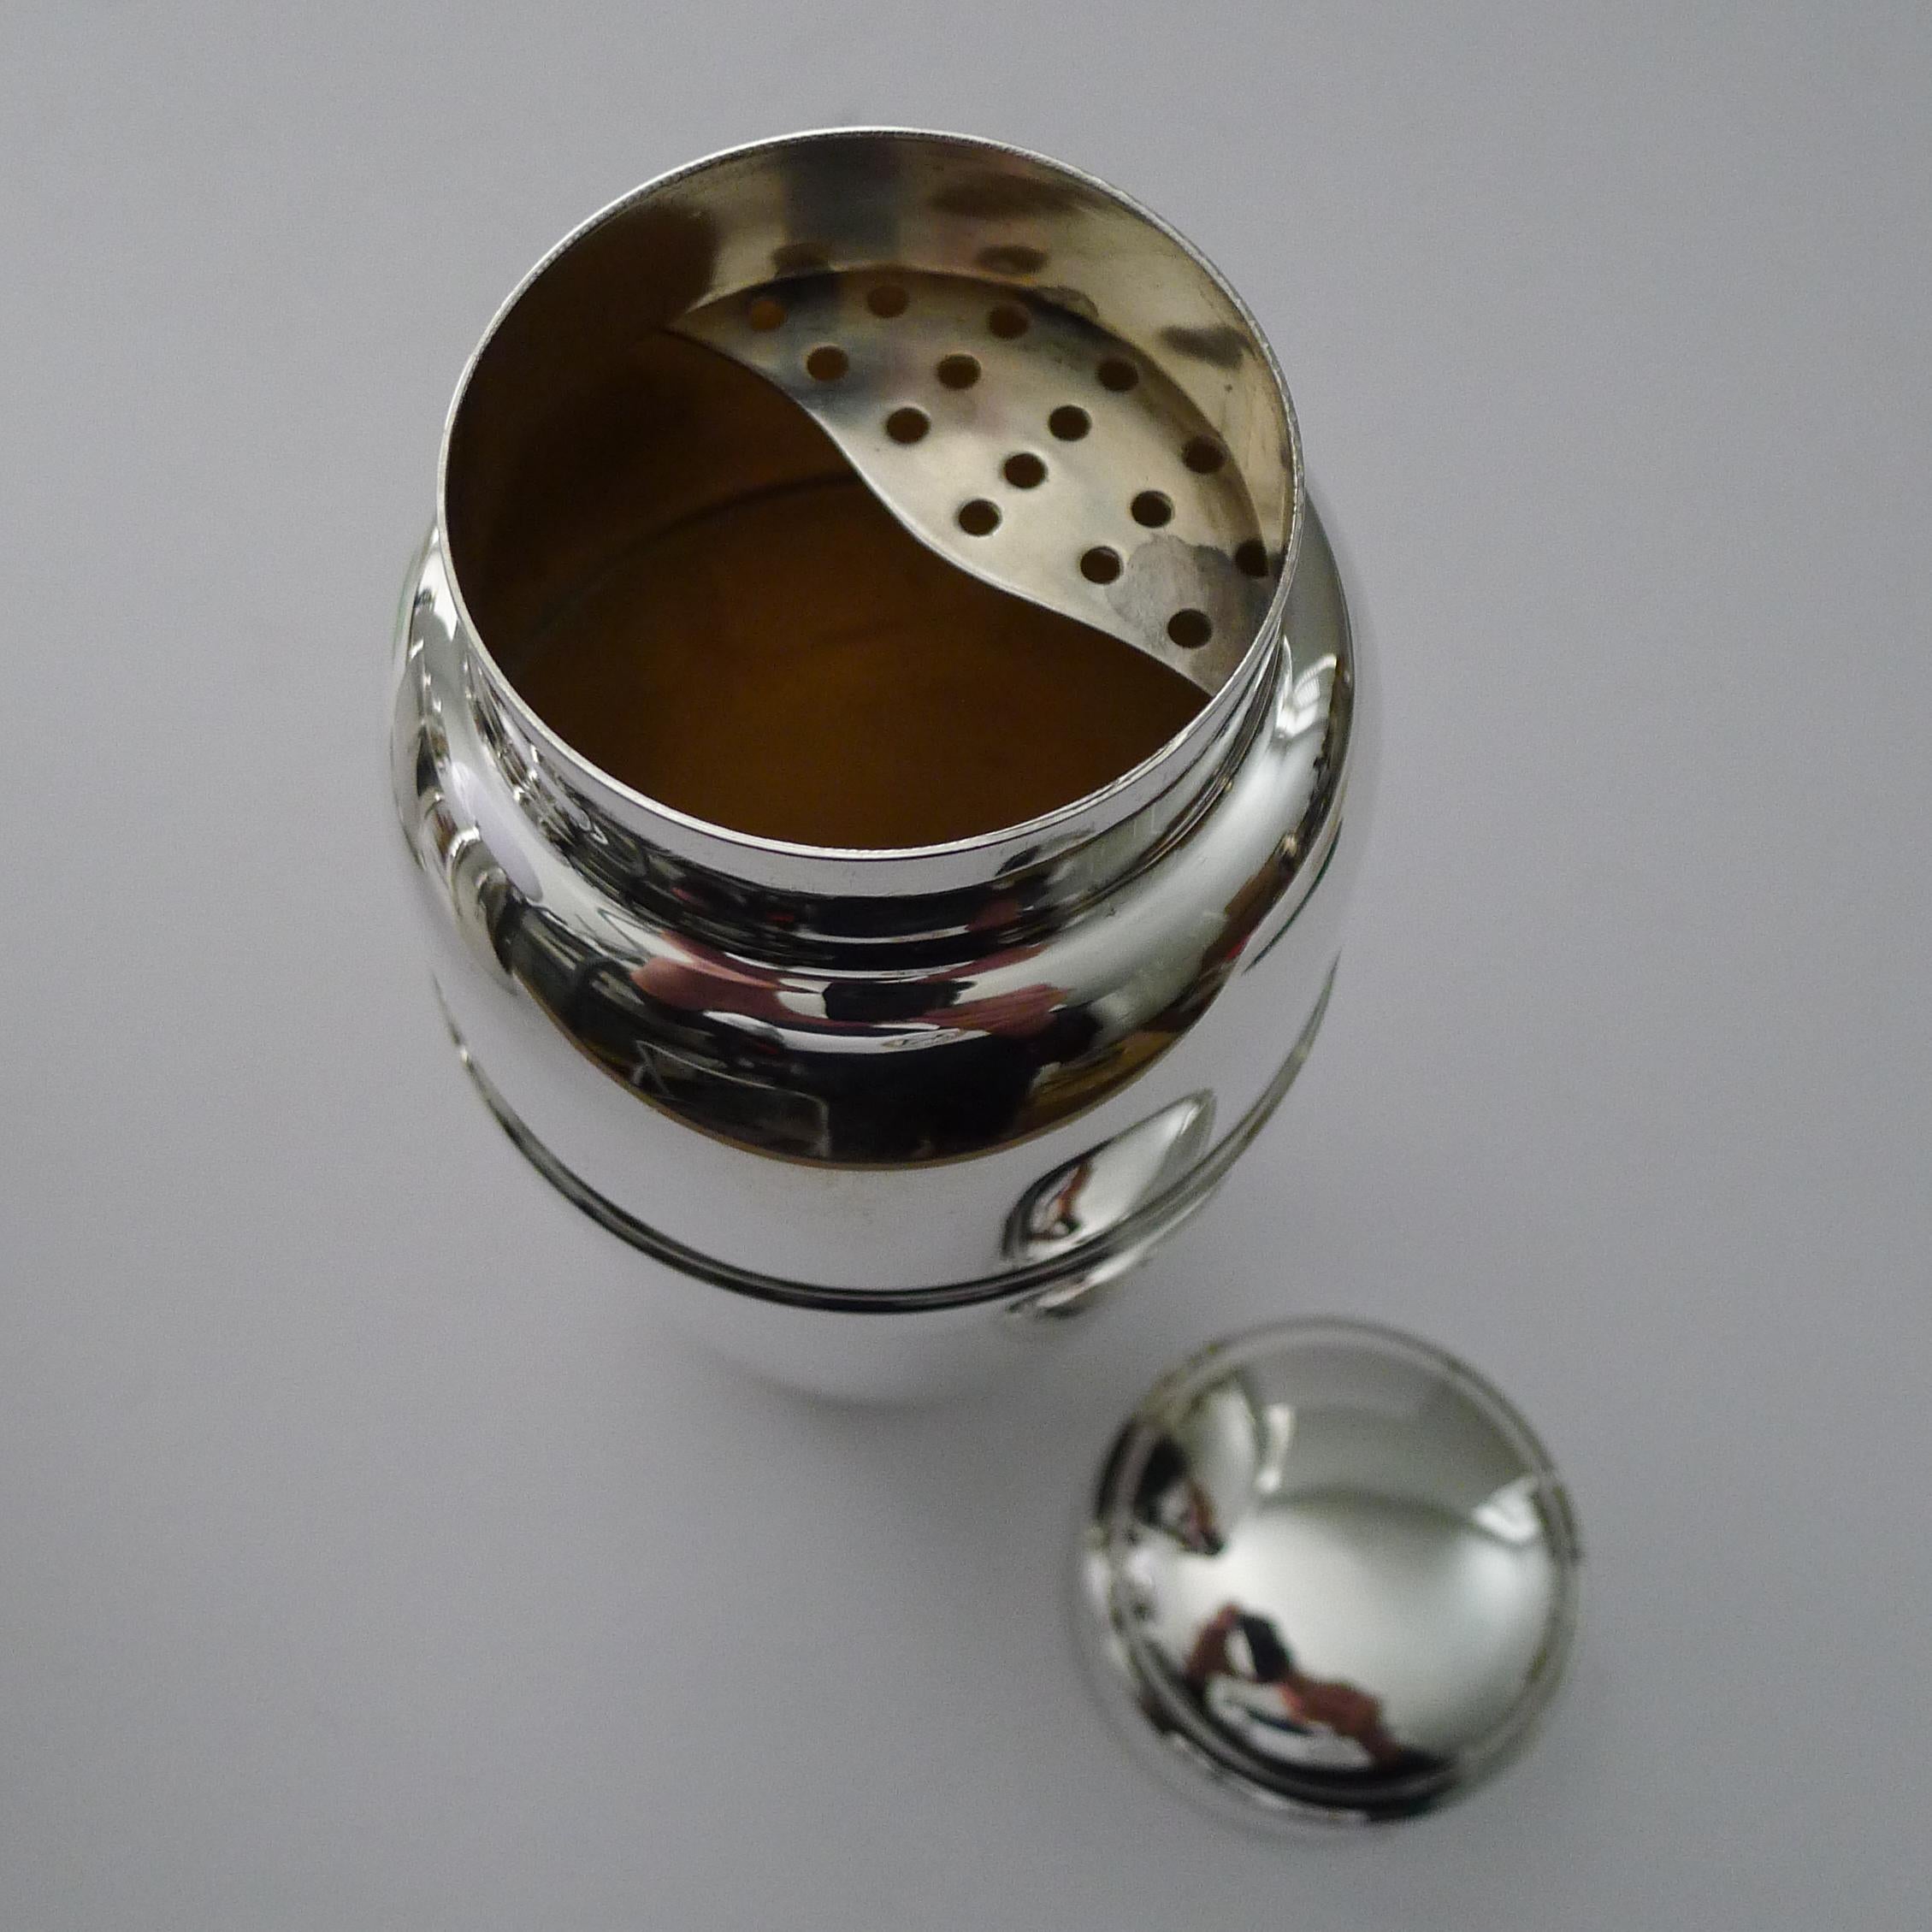 Art Deco Silver Plated Cocktail Shaker by C S Green & Co. For Sale 2